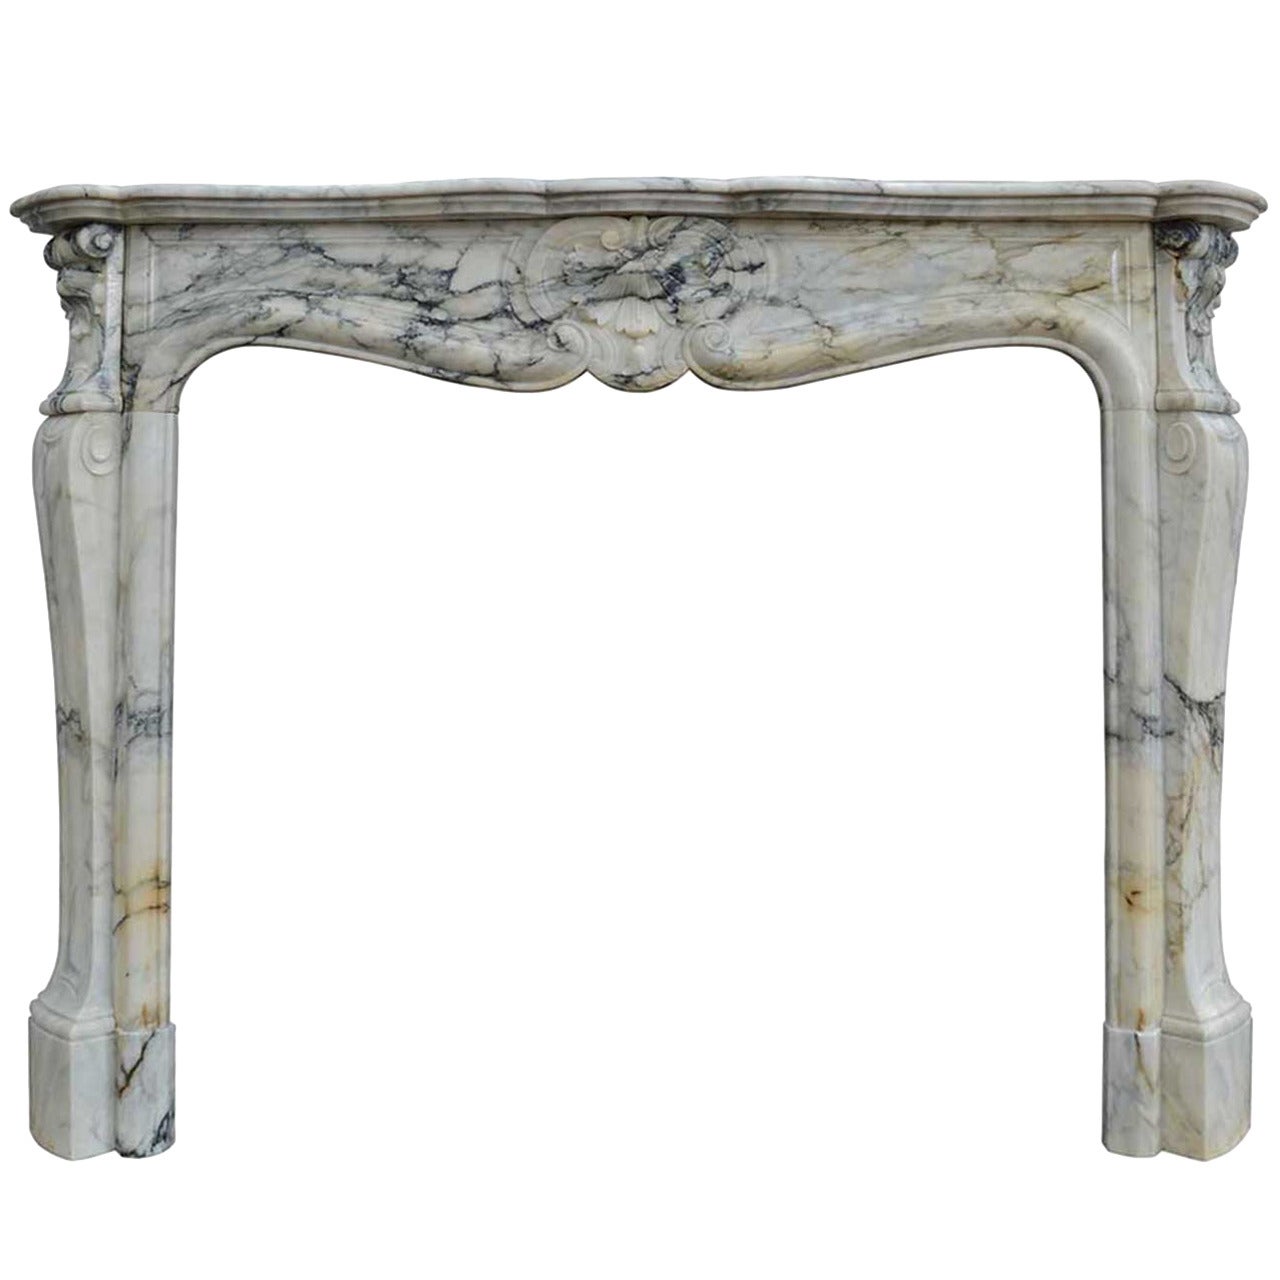 French Louis the 15th Style Arabescato Marble Fireplace, 19th Century For Sale